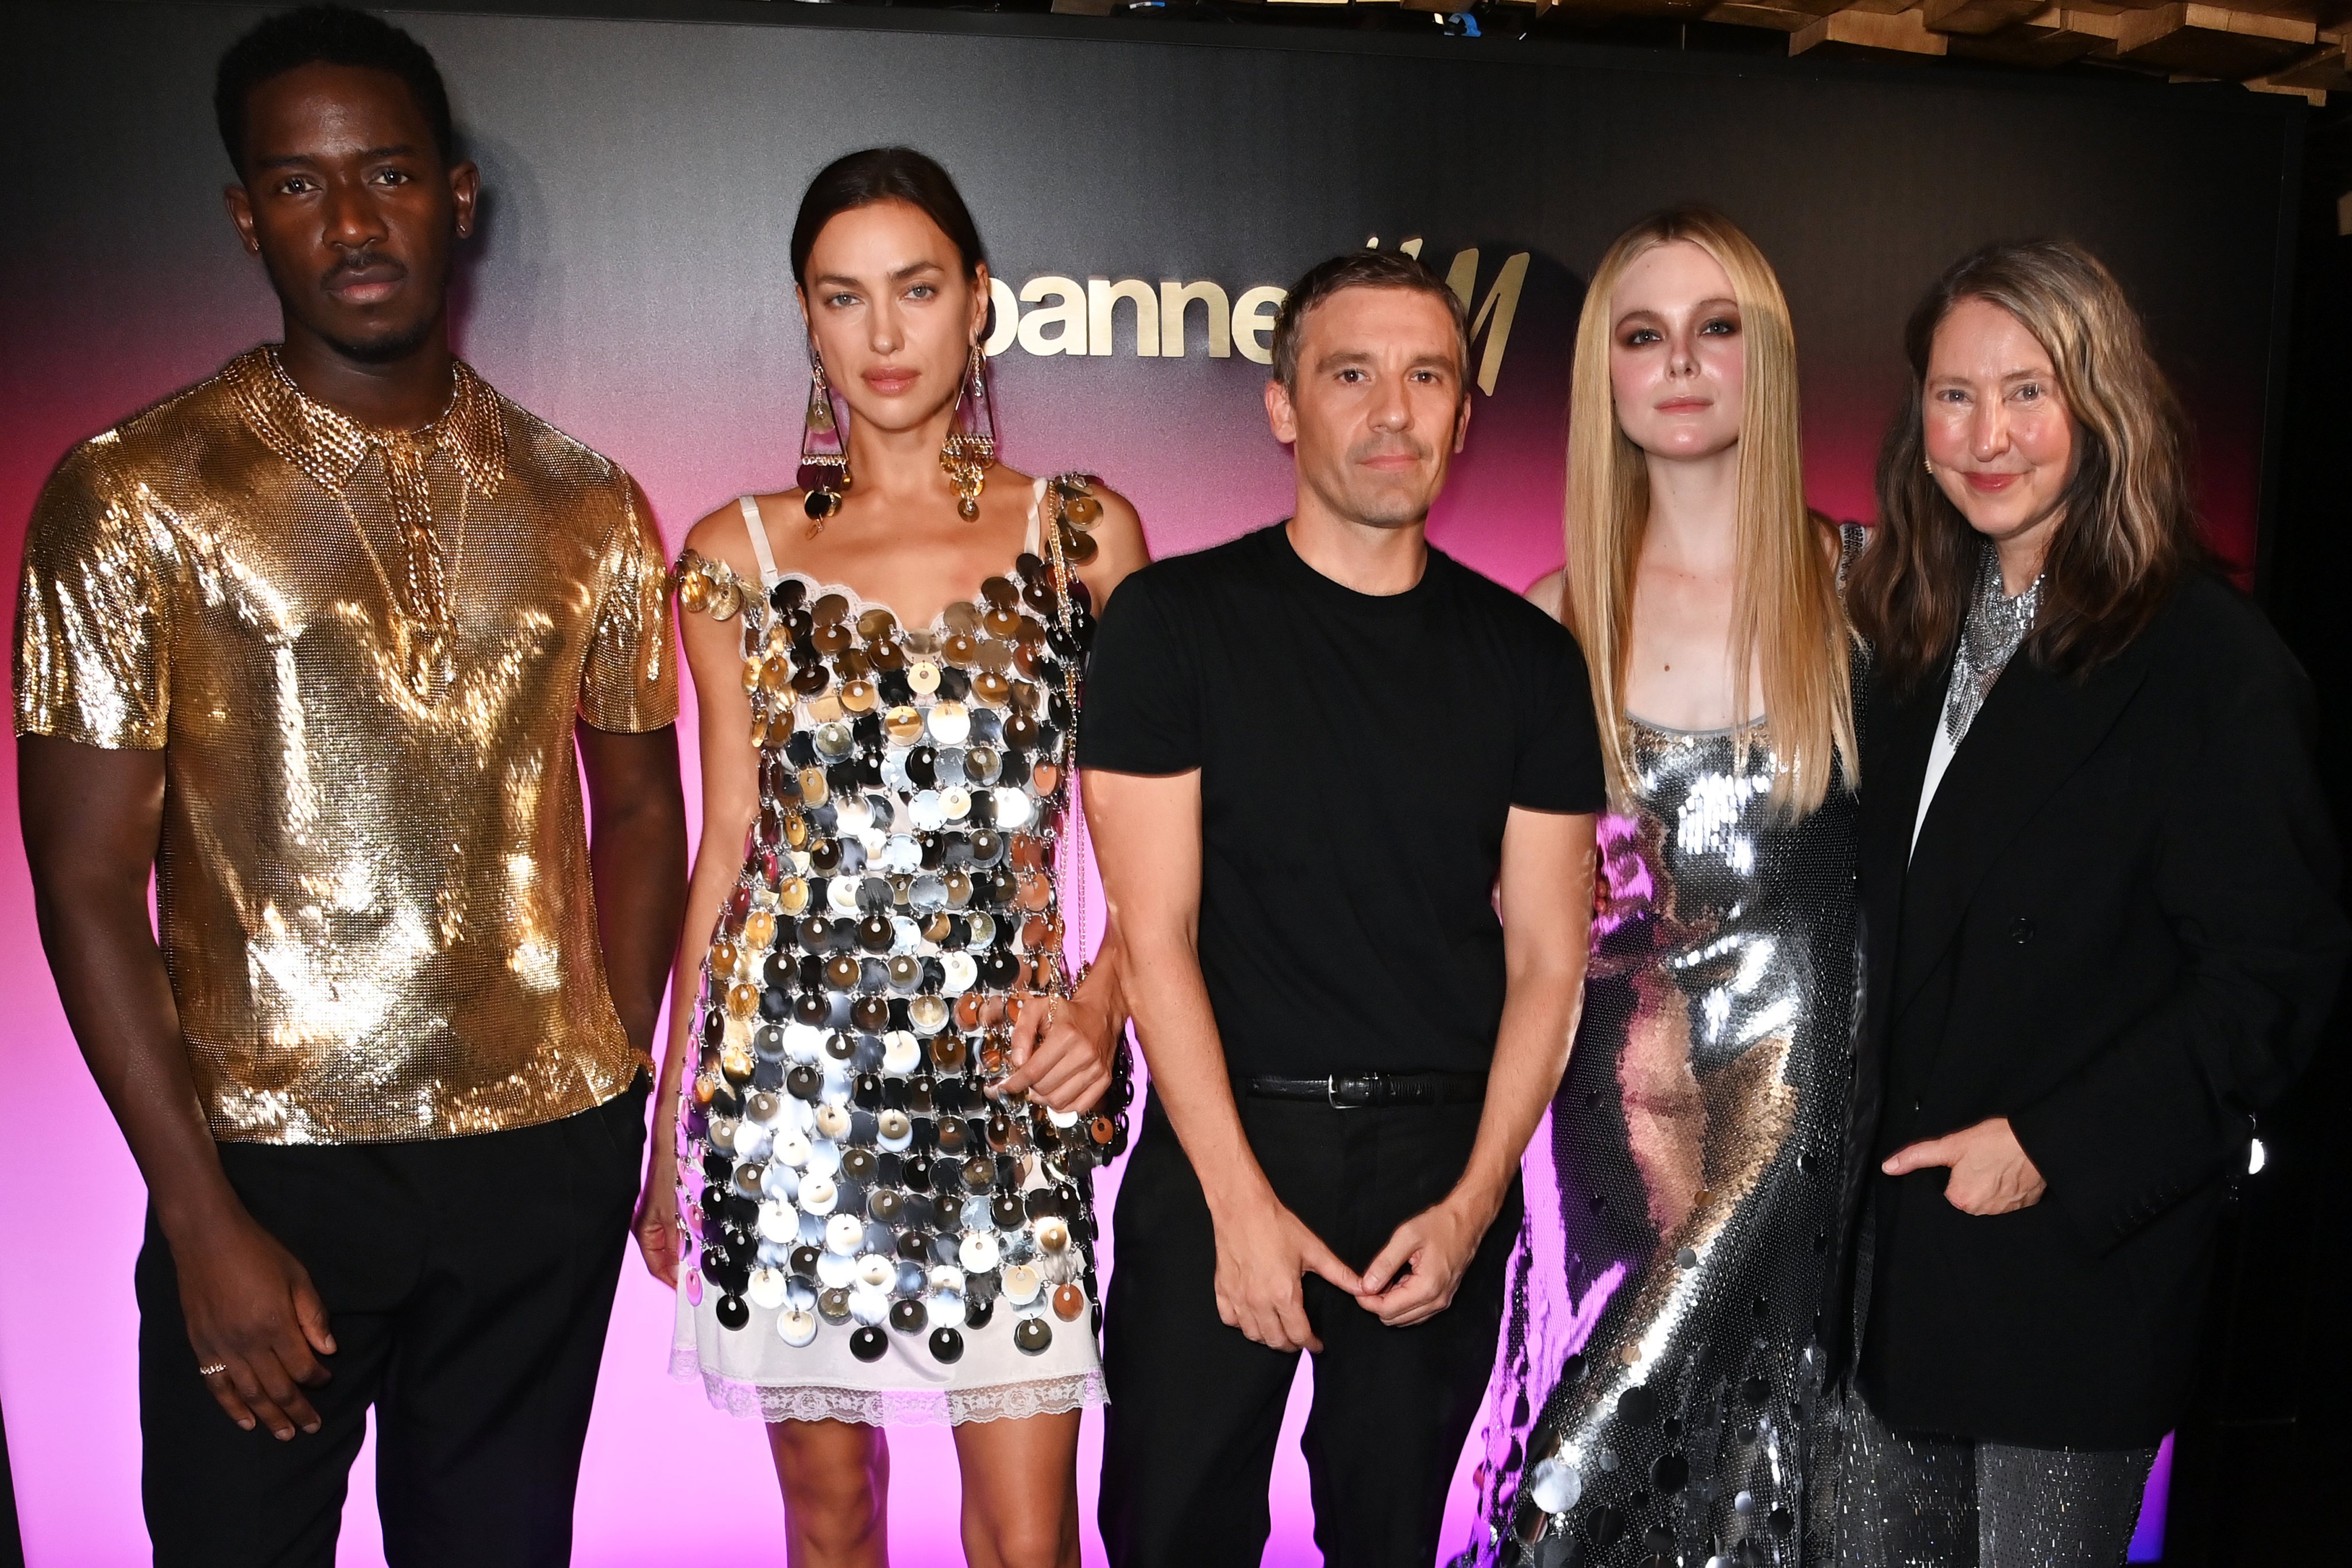 Rabanne creative director Julien Dossena (centre) – who has been credited with reinventing the Spanish brand – pictured last month with actor Damson Idris, model Irina Shayk and actress Elle Fanning, at the launch of the Rabanne H&M collection at Silencio in Paris, France. Photo: Getty Images